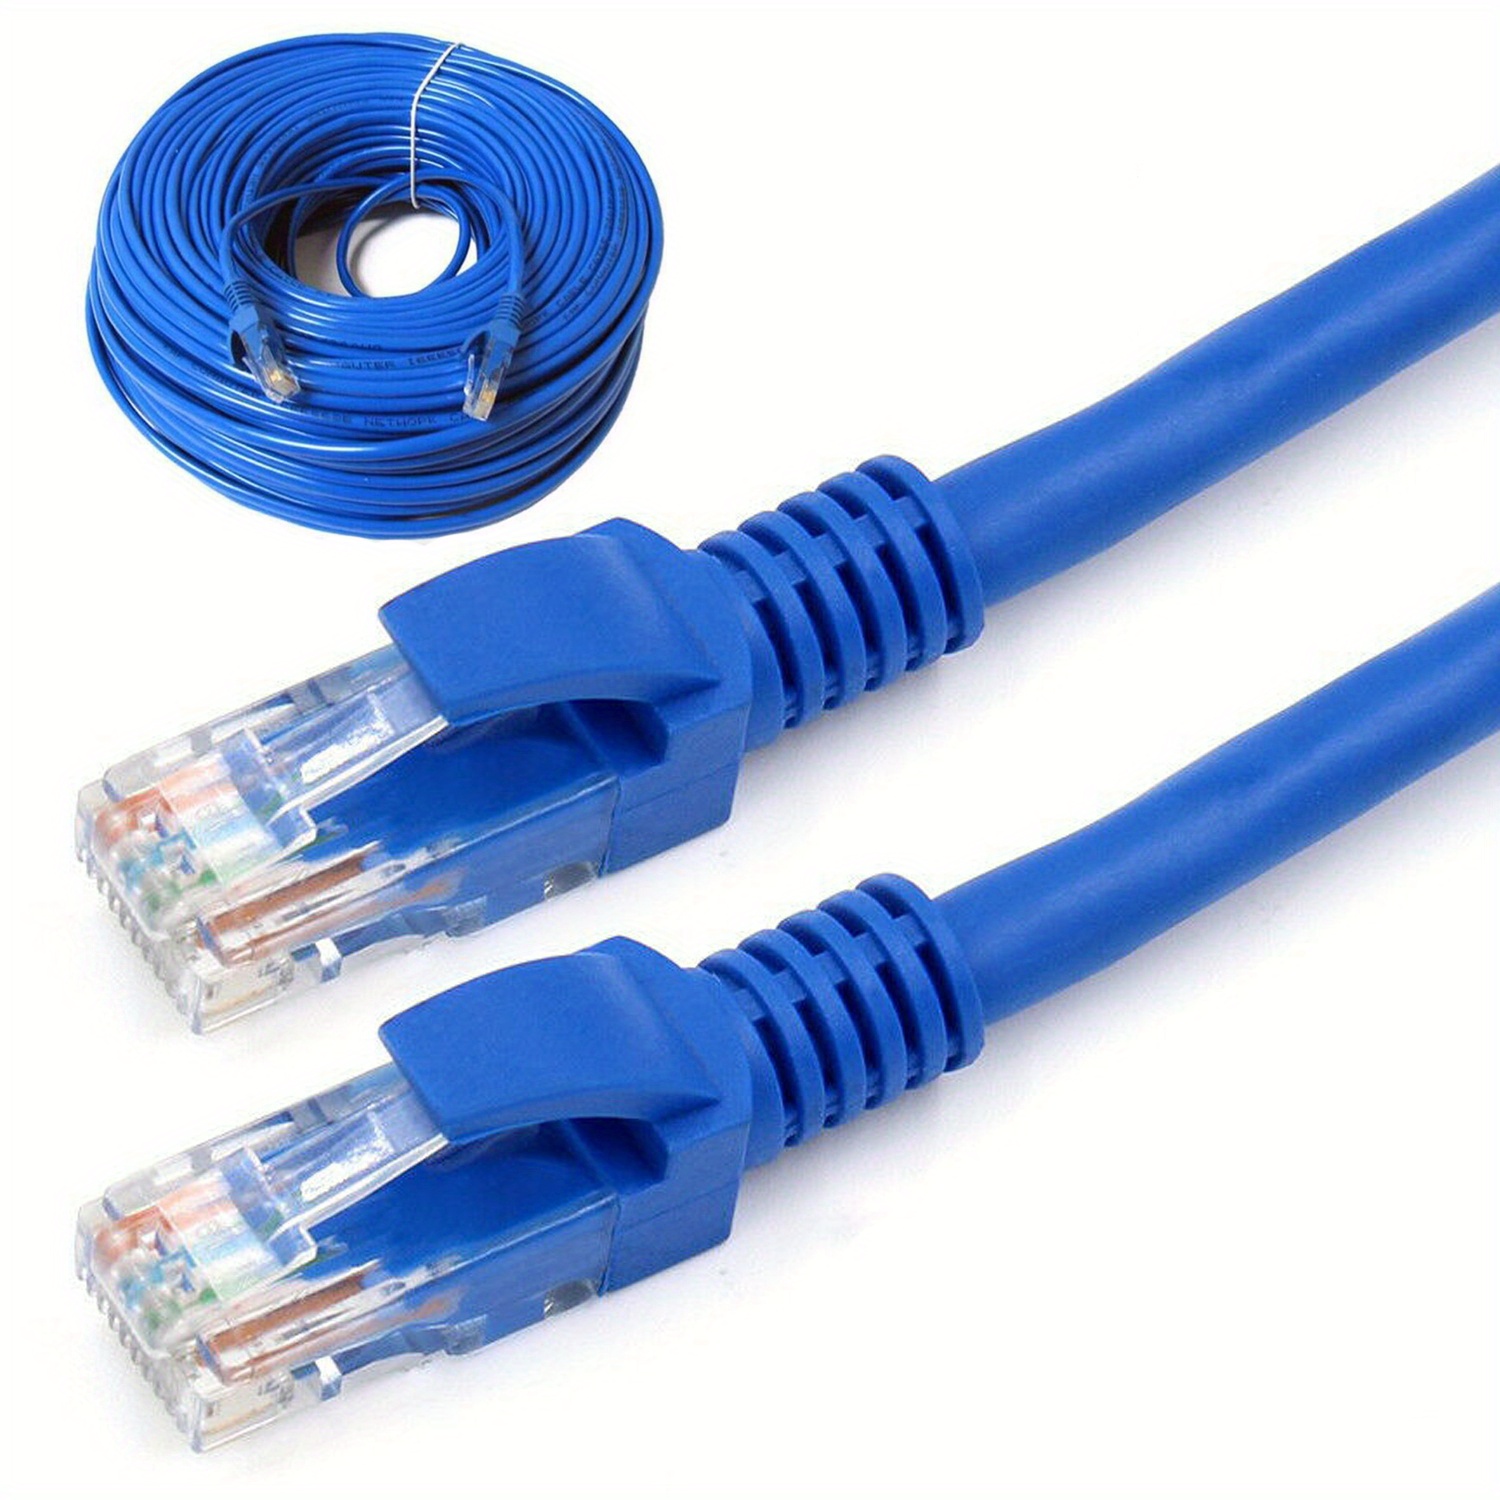 Cat 8 Ethernet Cable, 0.5m 1m 2m 3m 5m 6m 9m 12m 18m 30m Heavy Duty High  Speed Internet Network Cable, Professional LAN Cable Protected in Wall